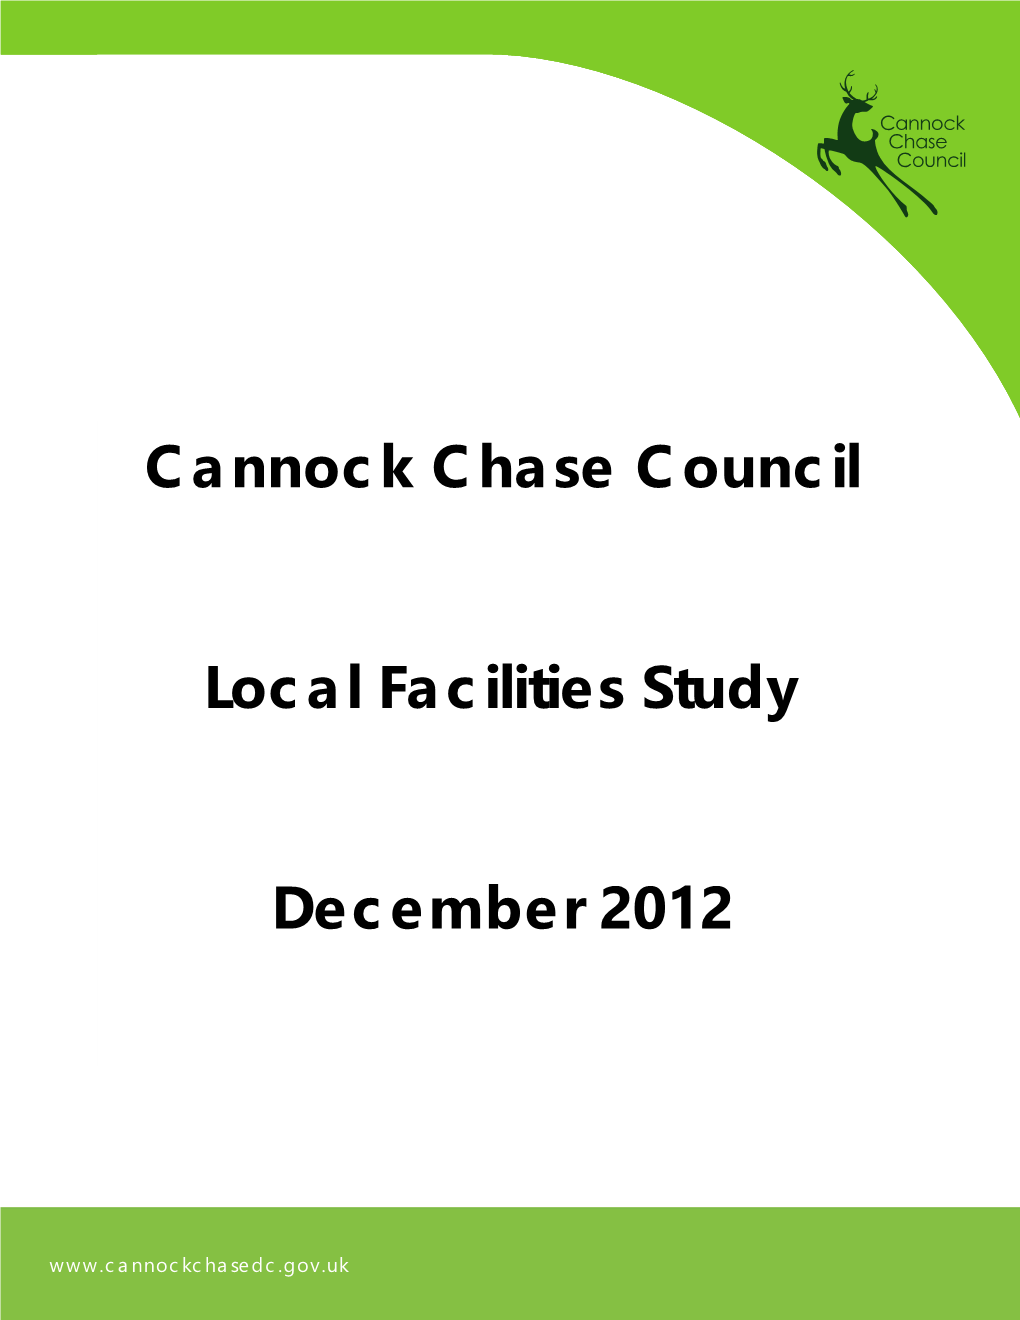 Cannock Chase Council Local Facilities Study December 2012